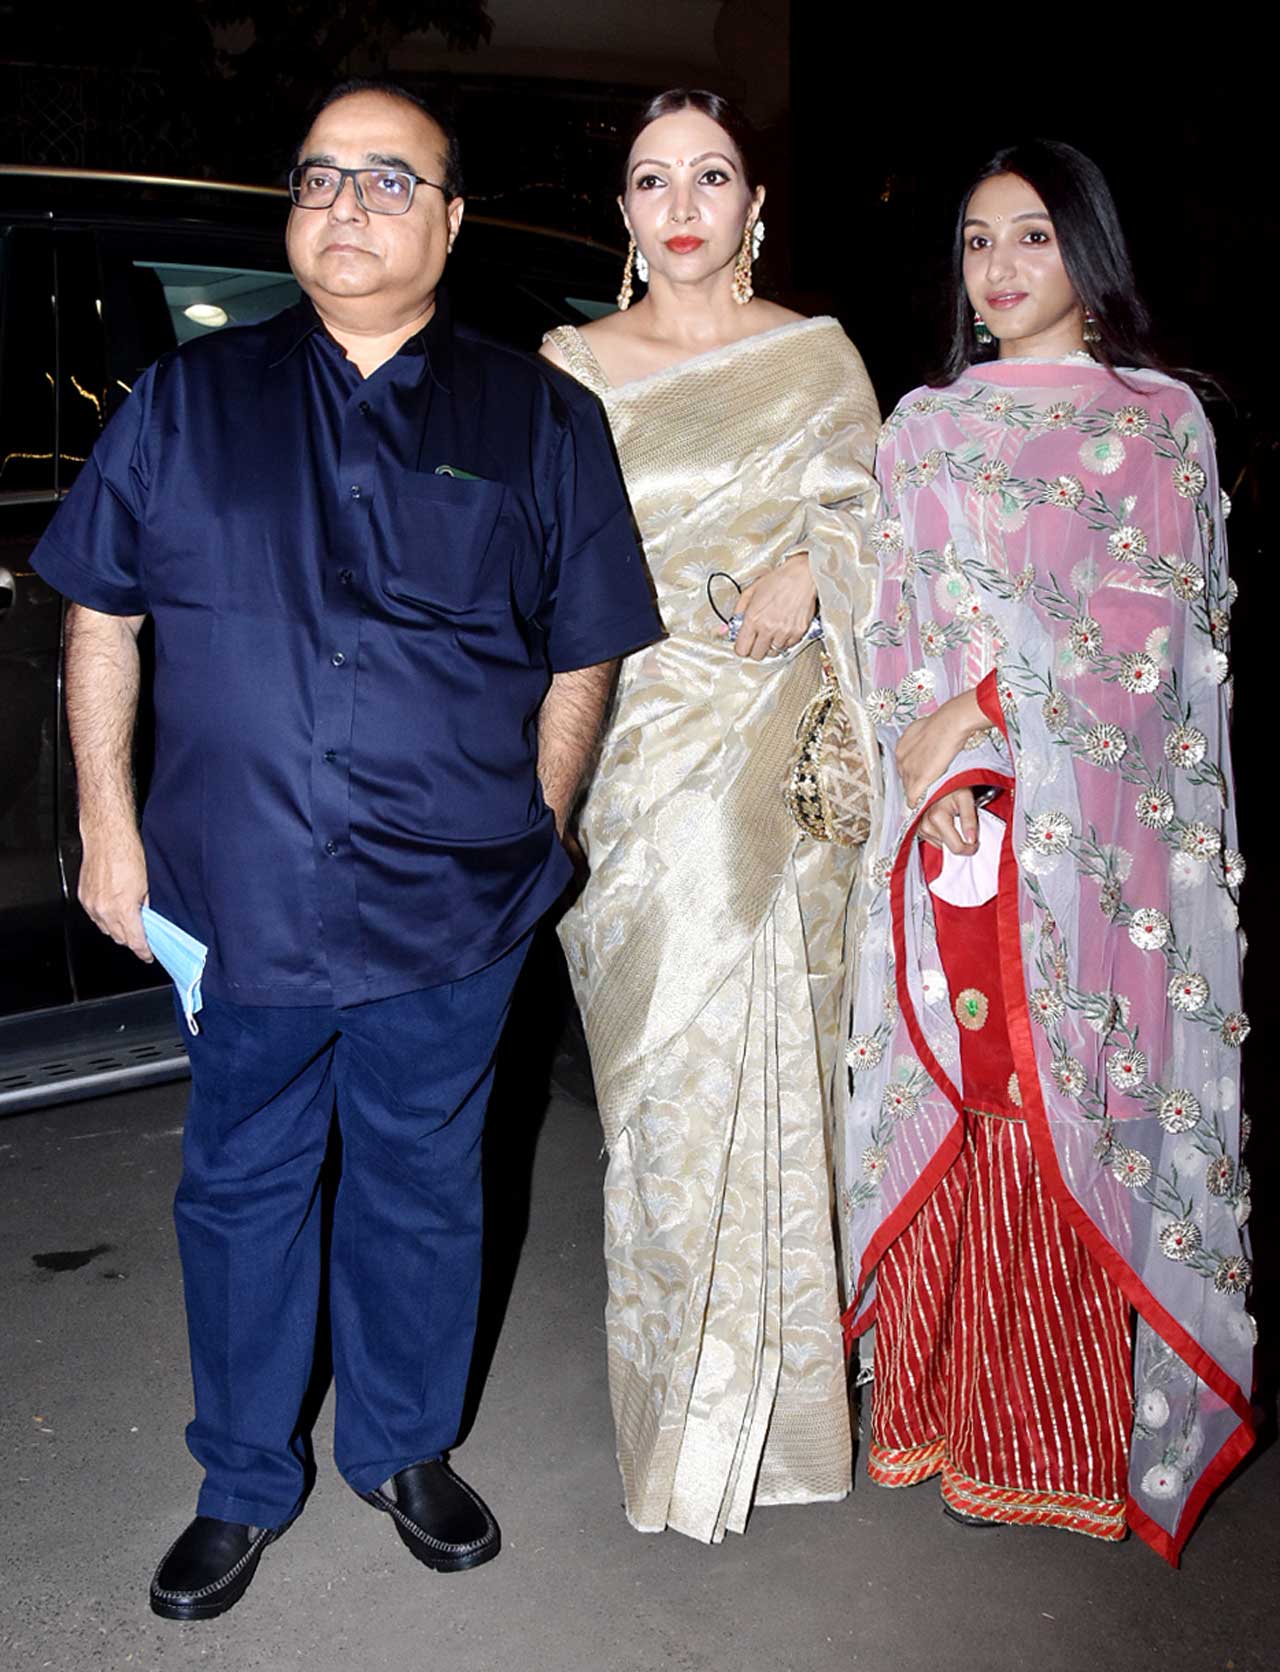 Janhvi Kapoor's bestie Tanisha Santoshi was also clicked at Priyaank and Shaza's wedding function. The star kid attended the ceremony with parents, who are popular Bollywood producers, Rajkumar Santoshi and Manila Santoshi.